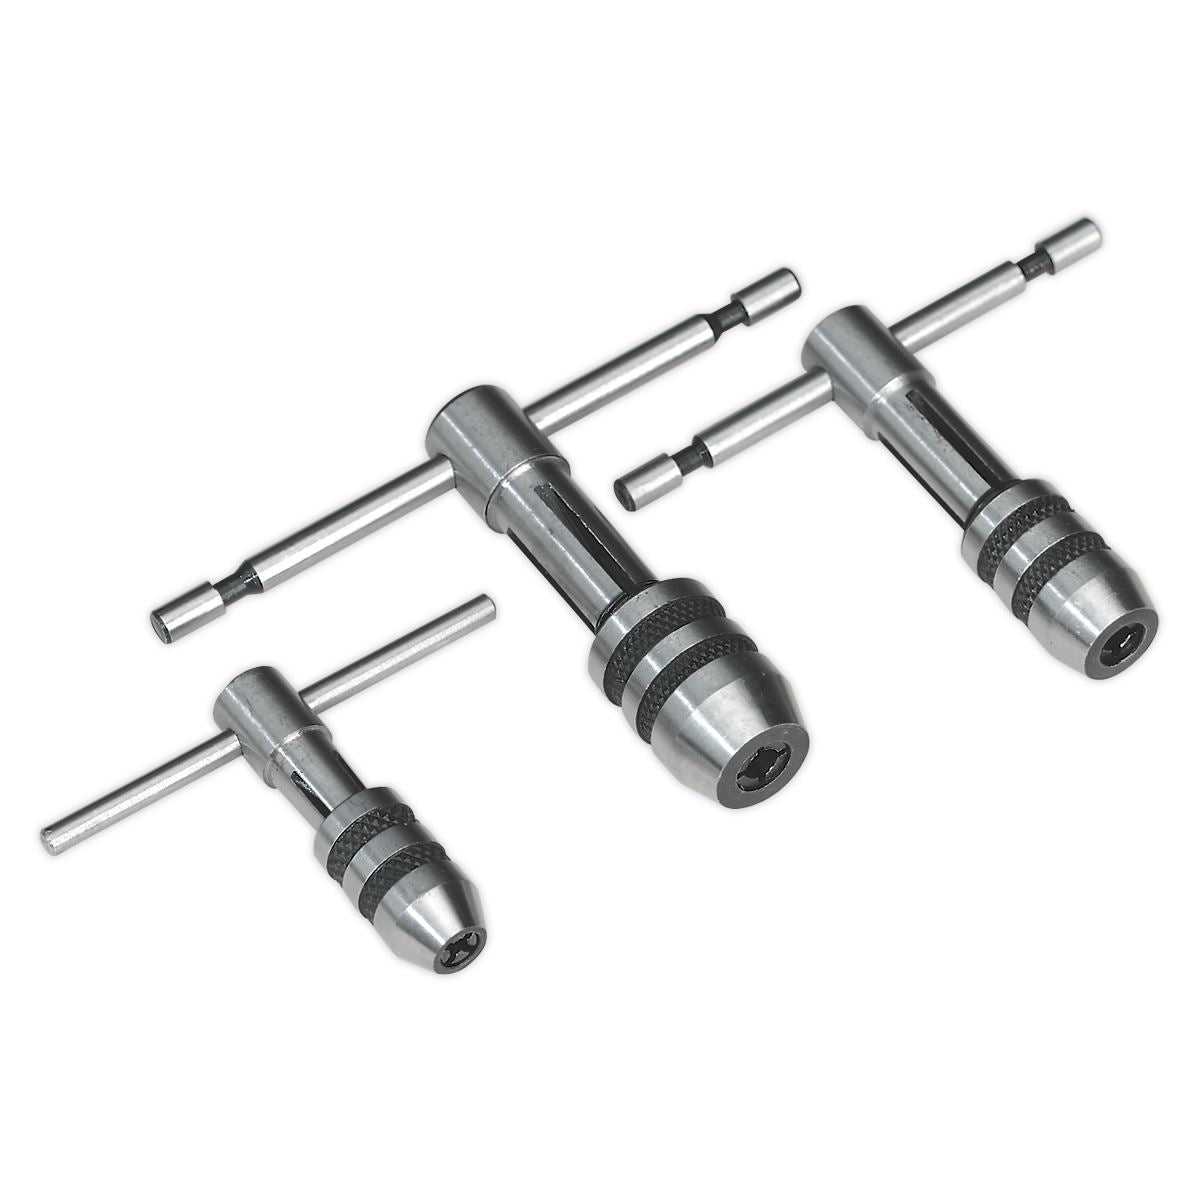 Sealey Tap Wrench Set T-Handle 3pc 3.9mm 5mm 7mm Engineer Reaming